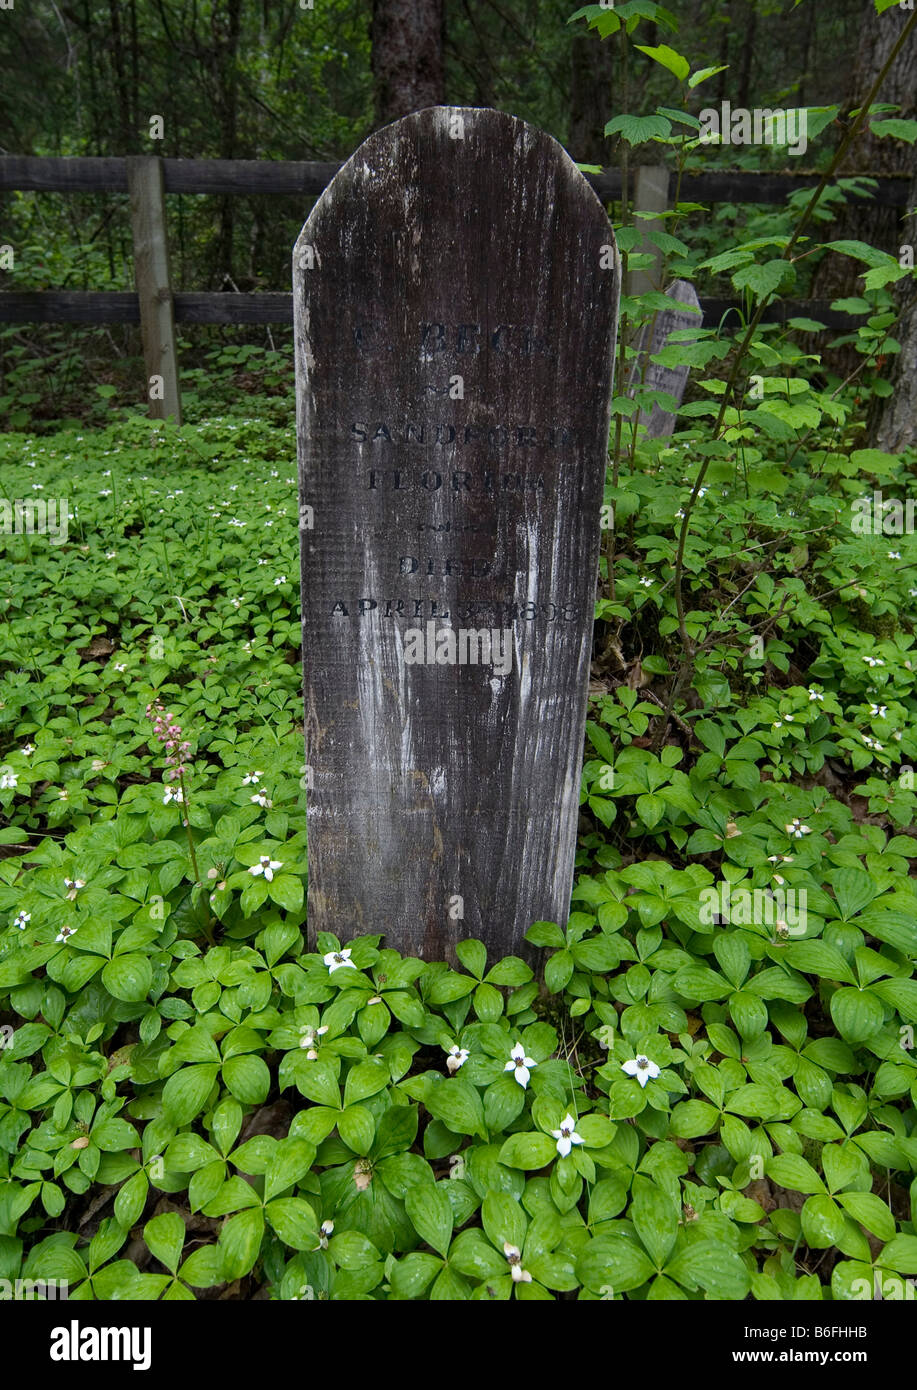 Grave near historic Dyea town side, wooden, weather worn tombstone, board, pacific rain forest, Klondike Gold Rush, Chilkoot Tr Stock Photo